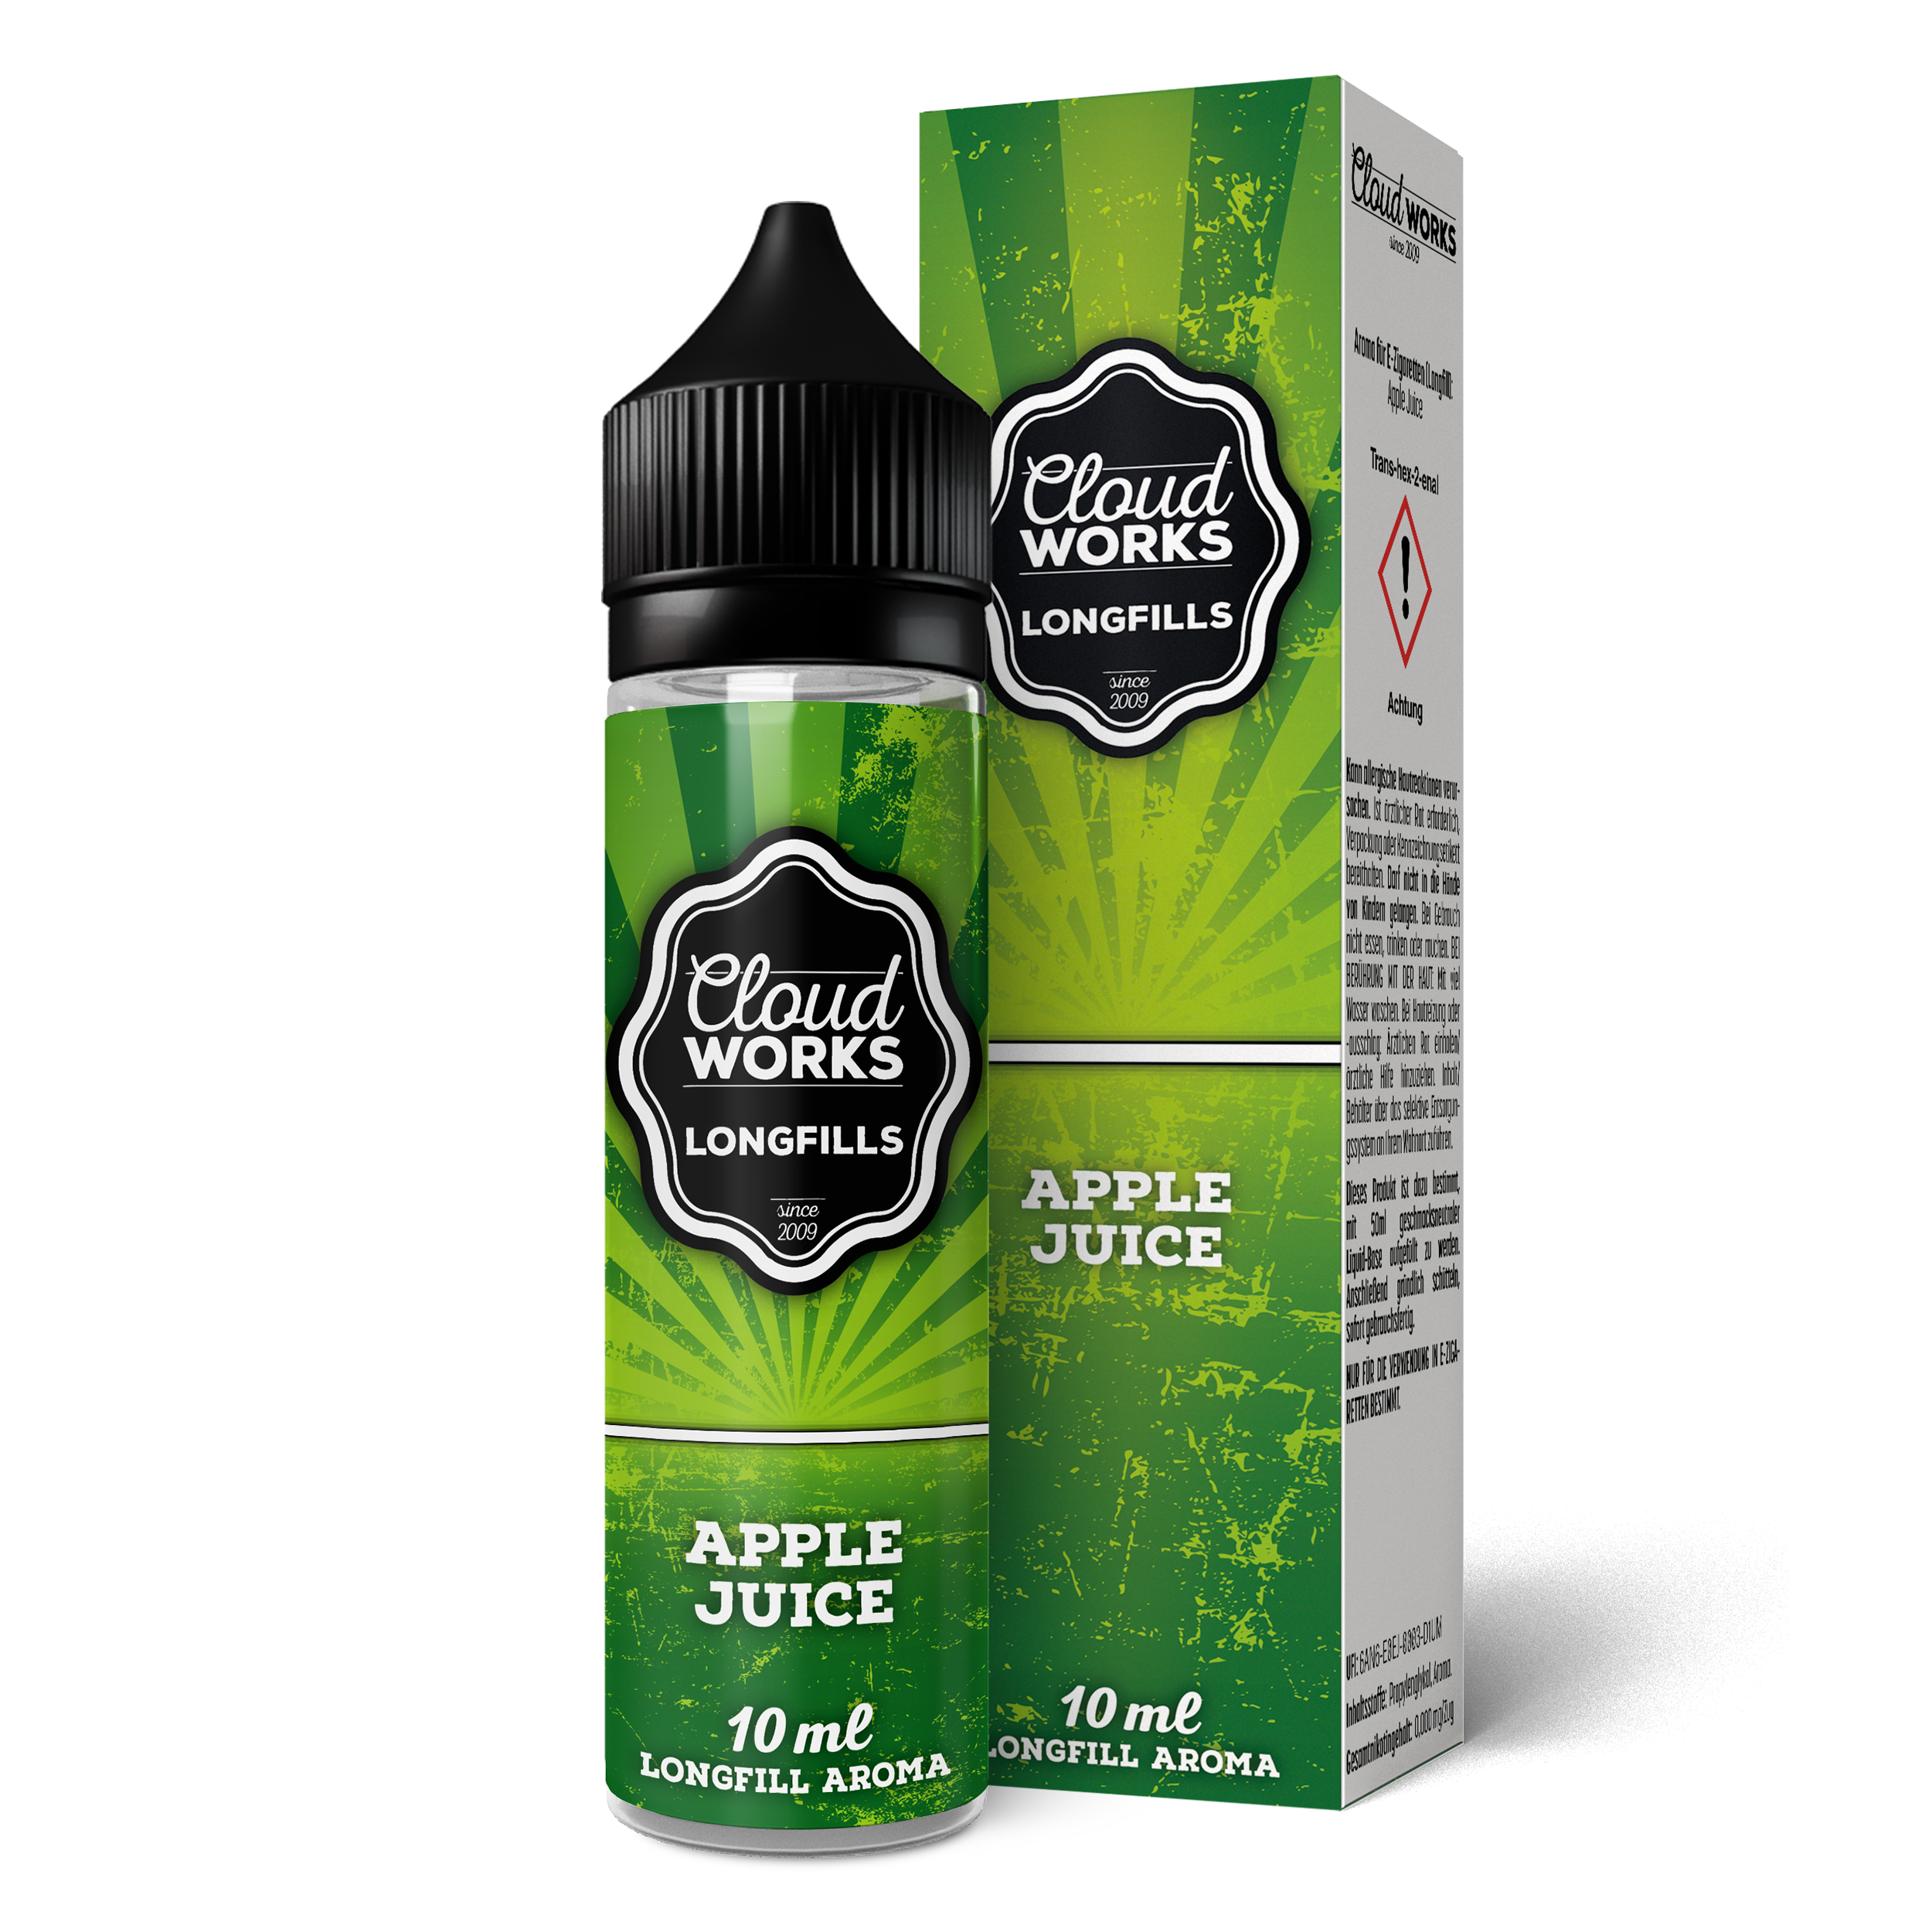 Cloudworks Overdosed | Apple Juice | Longfill Aroma 10ml in 60ml Flasche